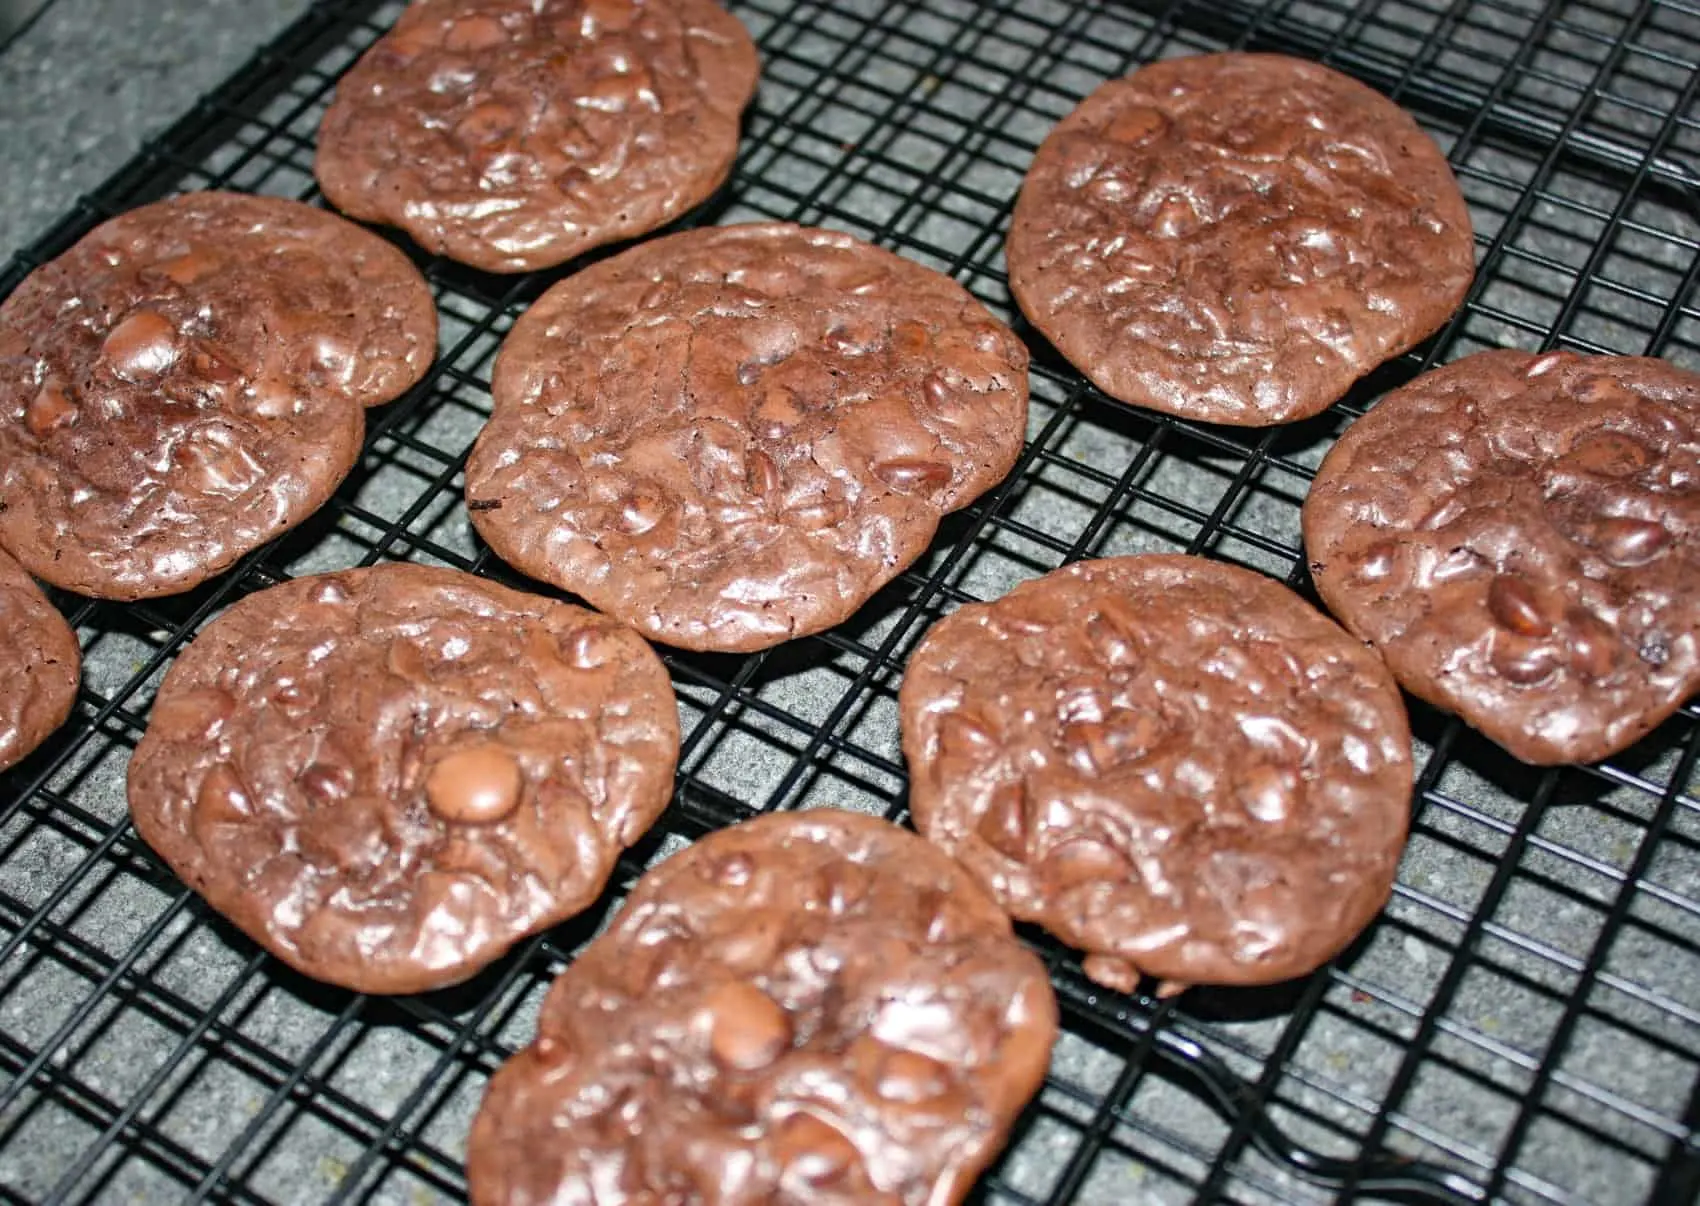 For all of us that need to avoid gluten, Flourless Chocolate Cookies are a decadent treat, with their triple hit of chocolate, chewy goodness.  